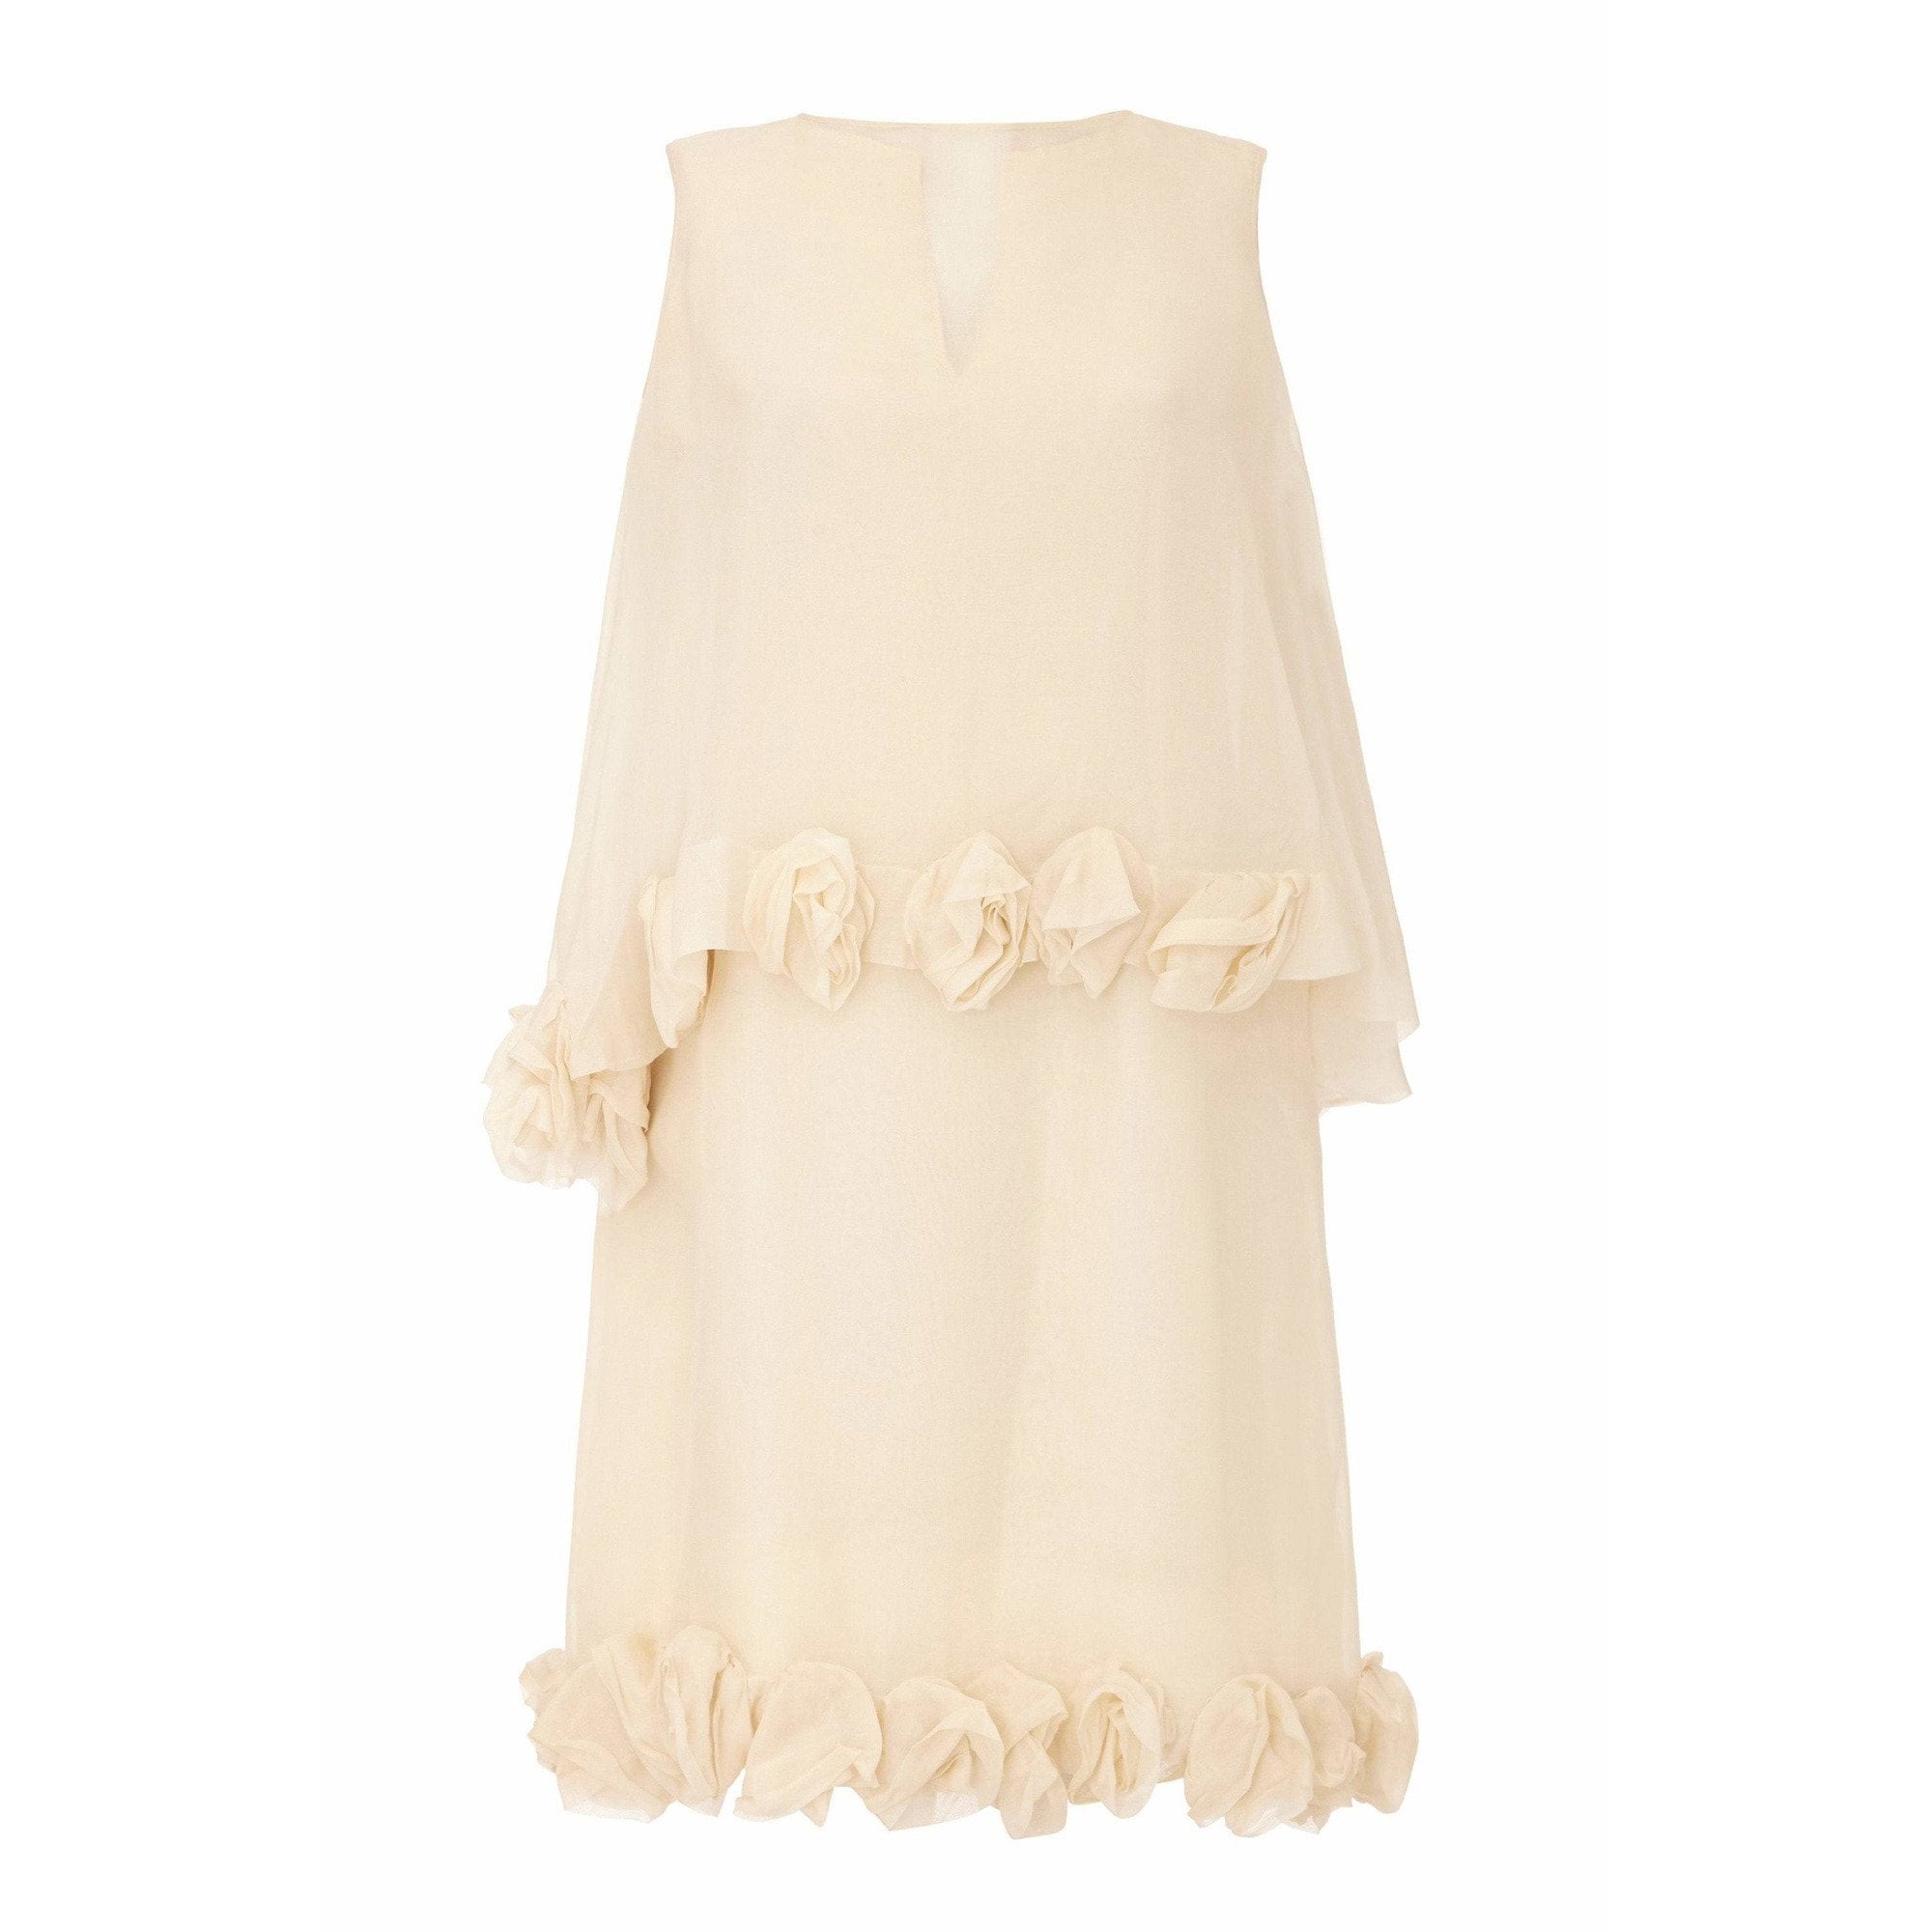 ARCHIVE - 1960s Christian Dior Demi Couture Ivory Organza Dress & Jack